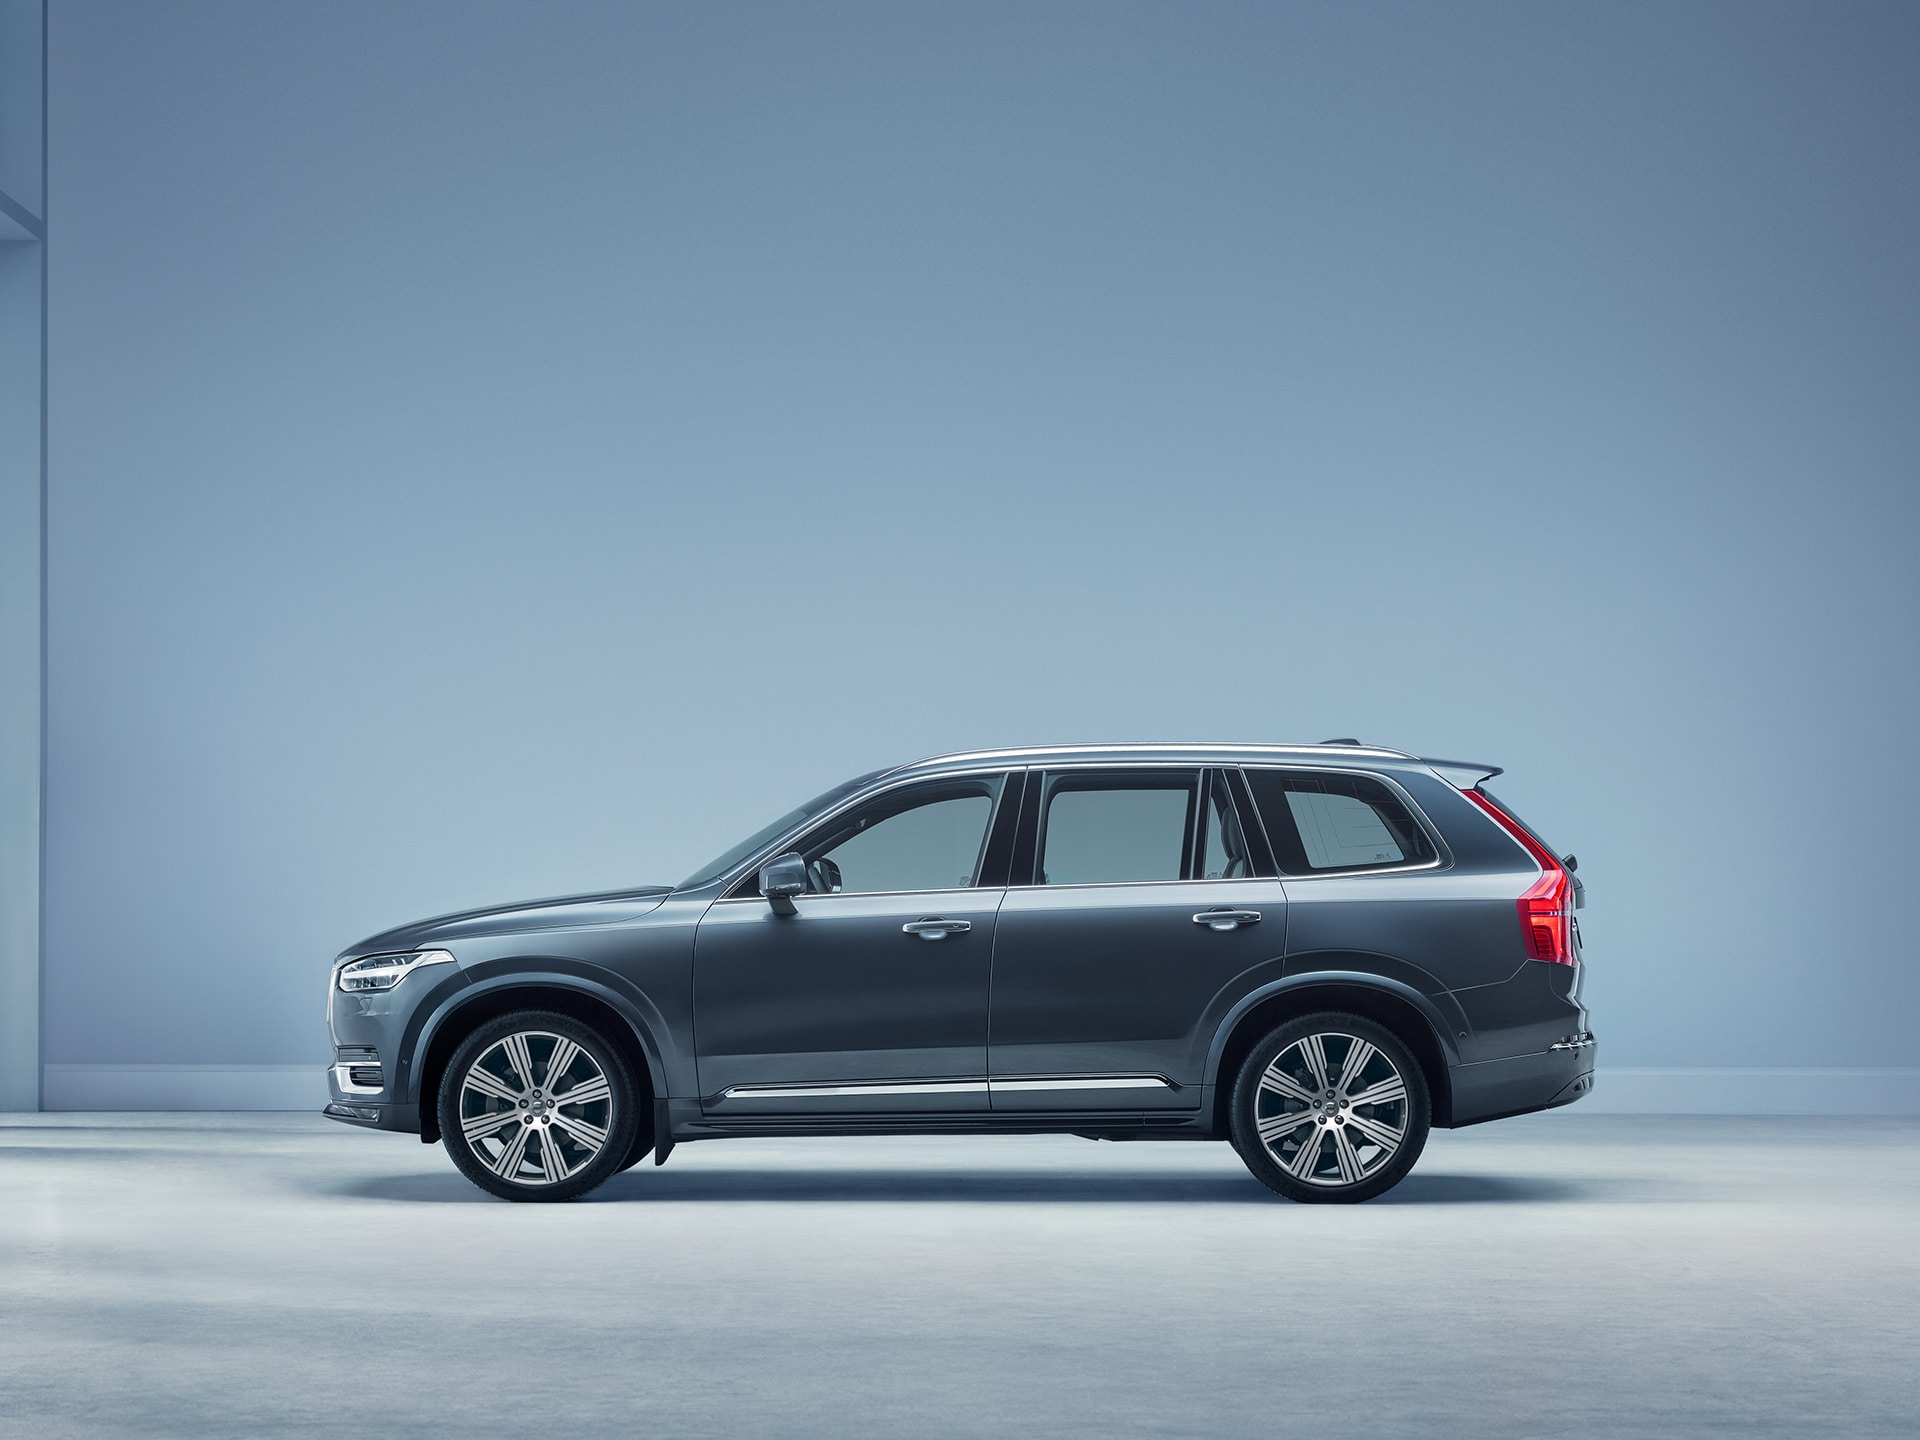 The side profile of a Volvo XC90 SUV